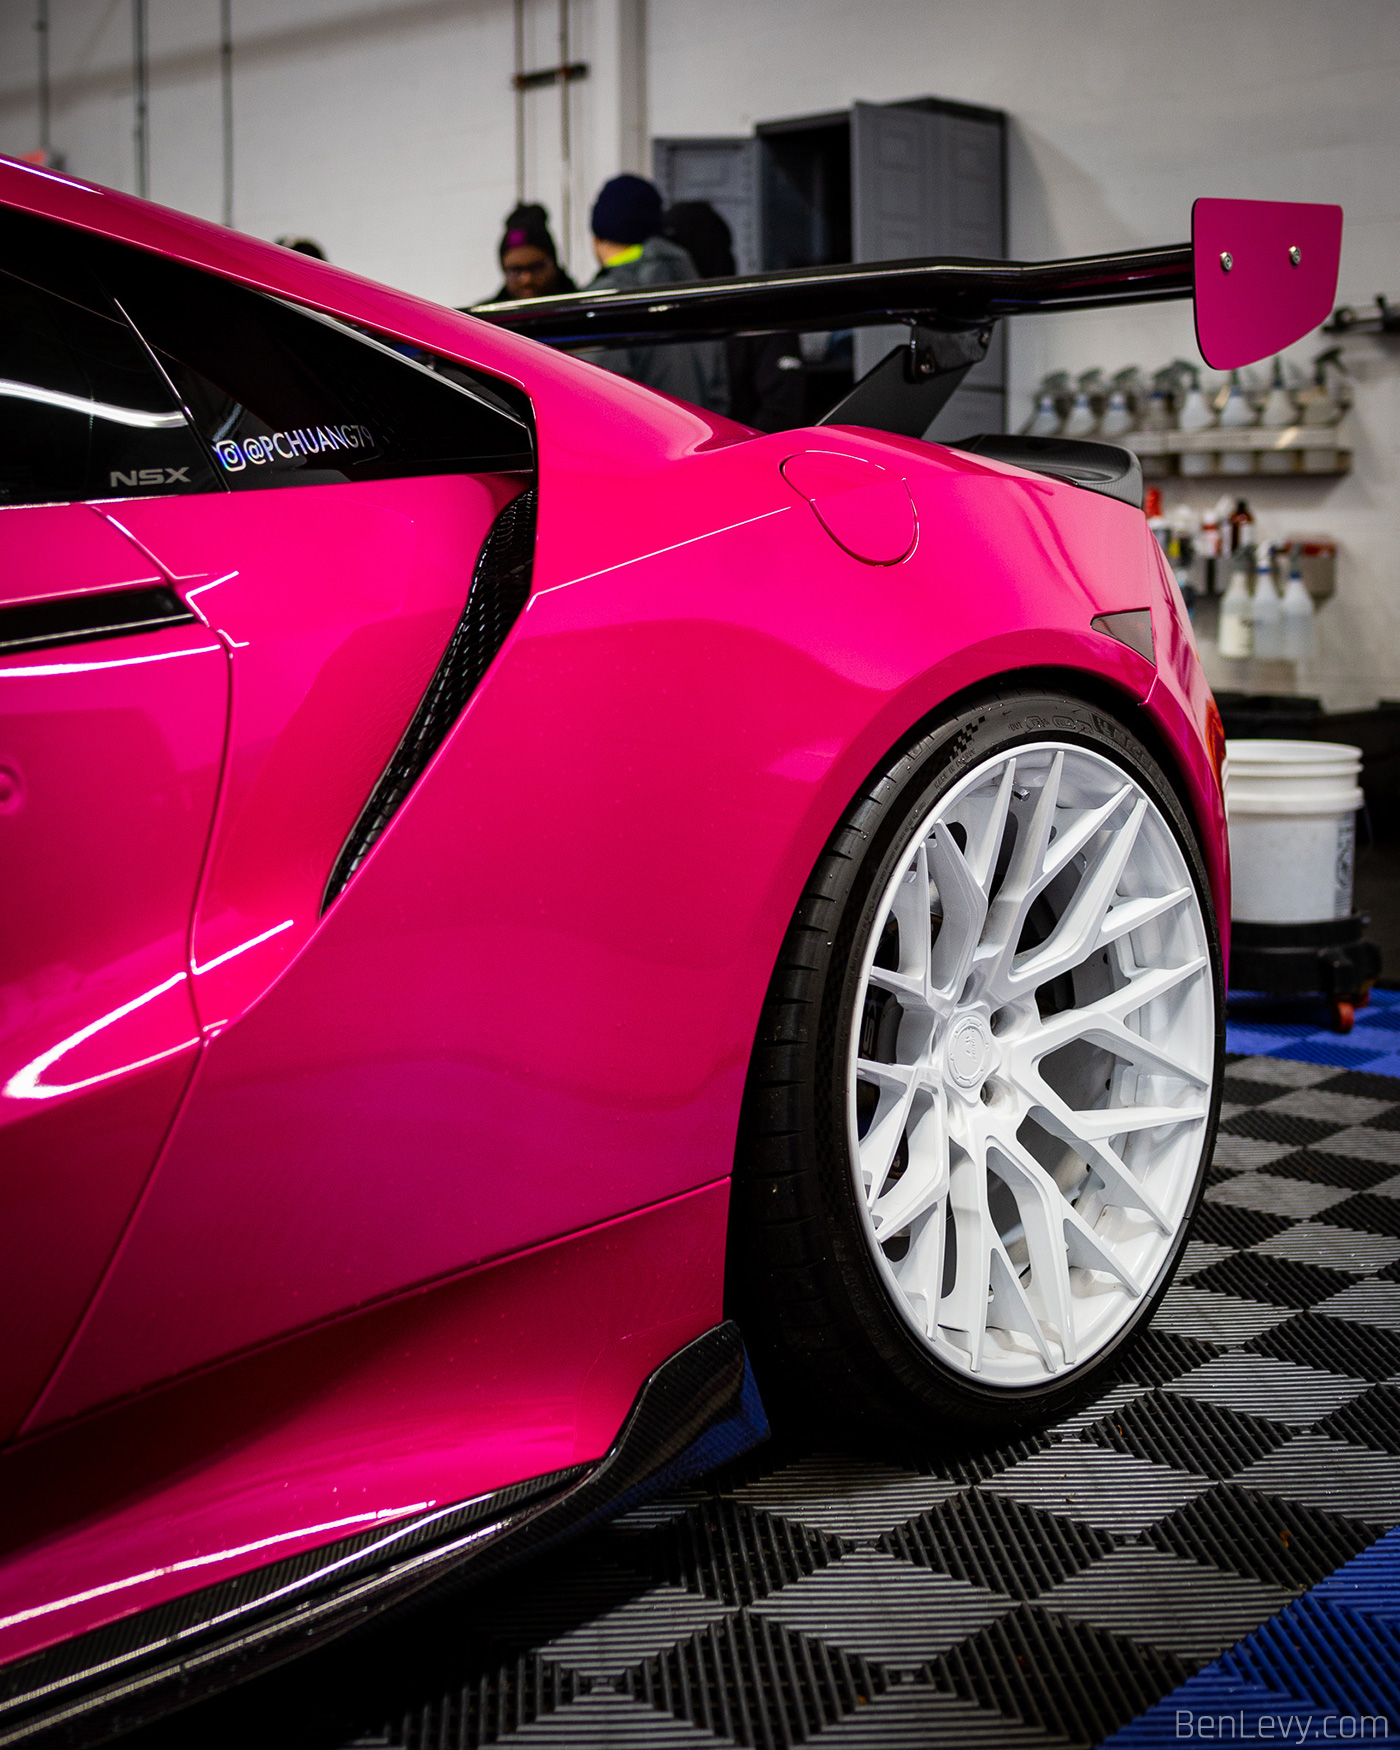 Rear Quarter Panel of Pink Acura NSX